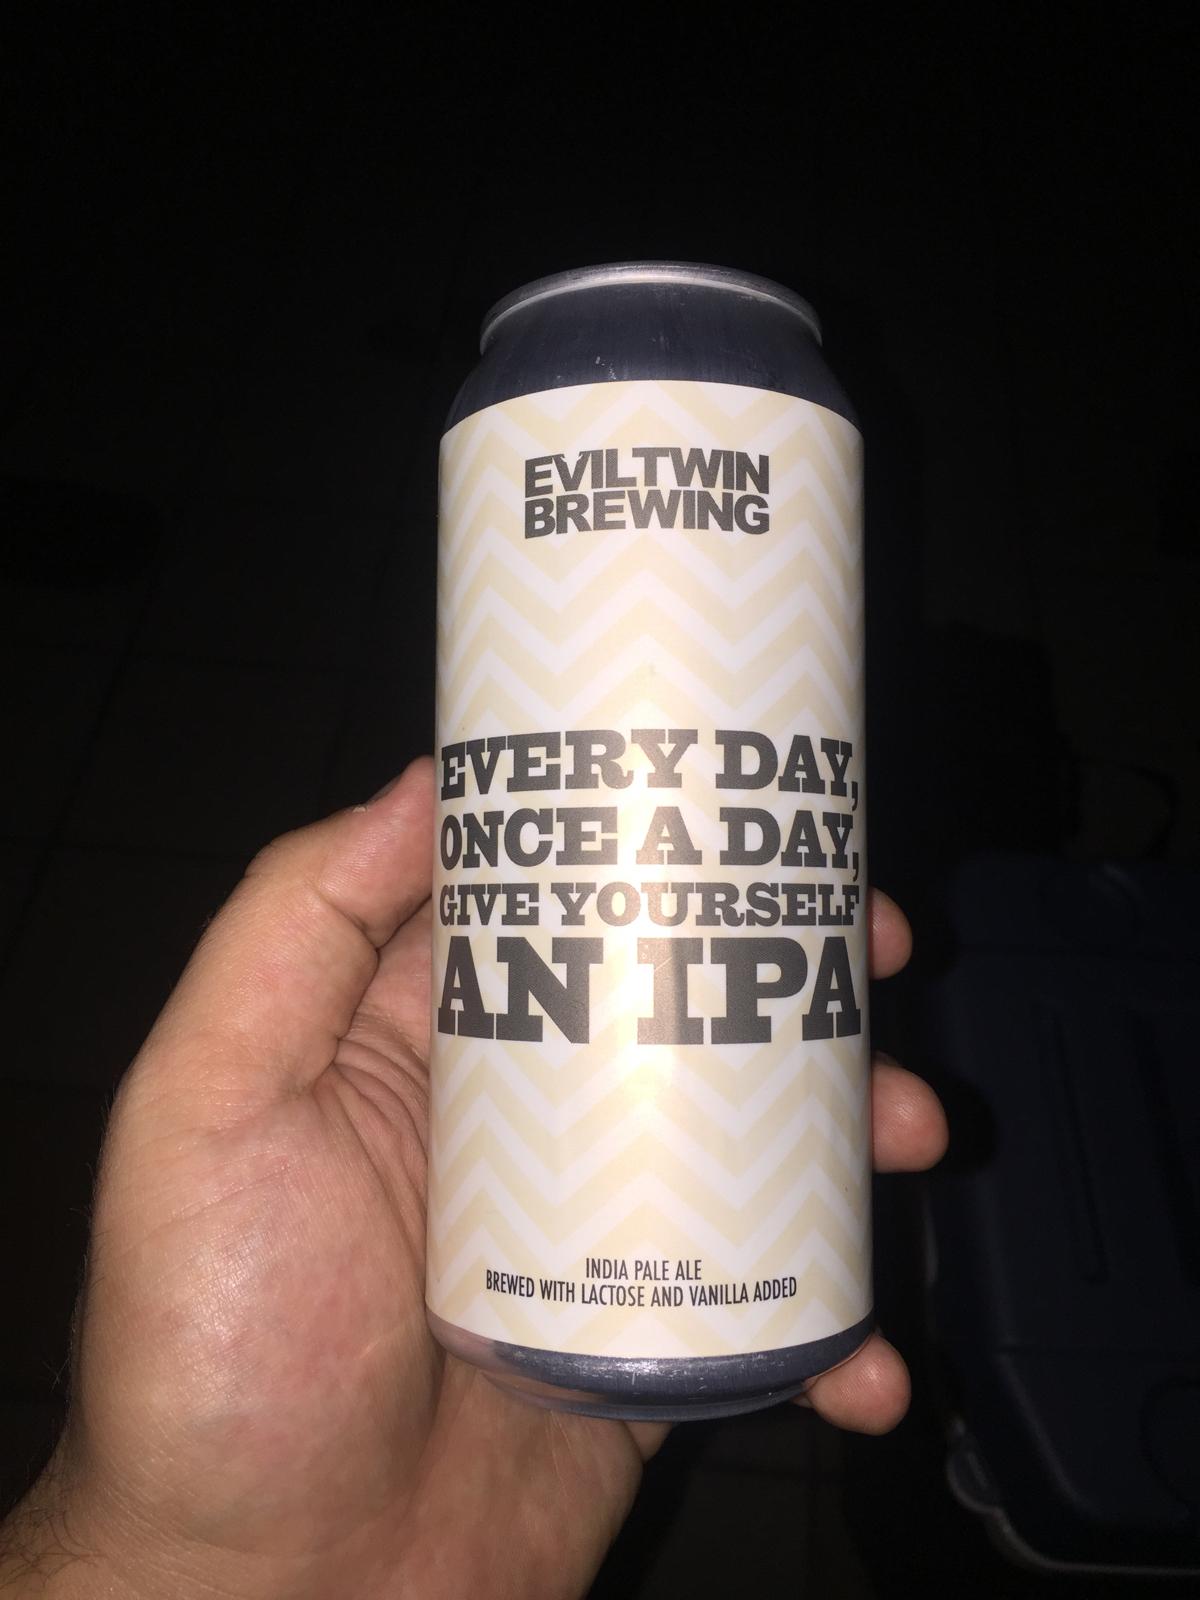 Every Day Once A Day Give Yourself An IPA